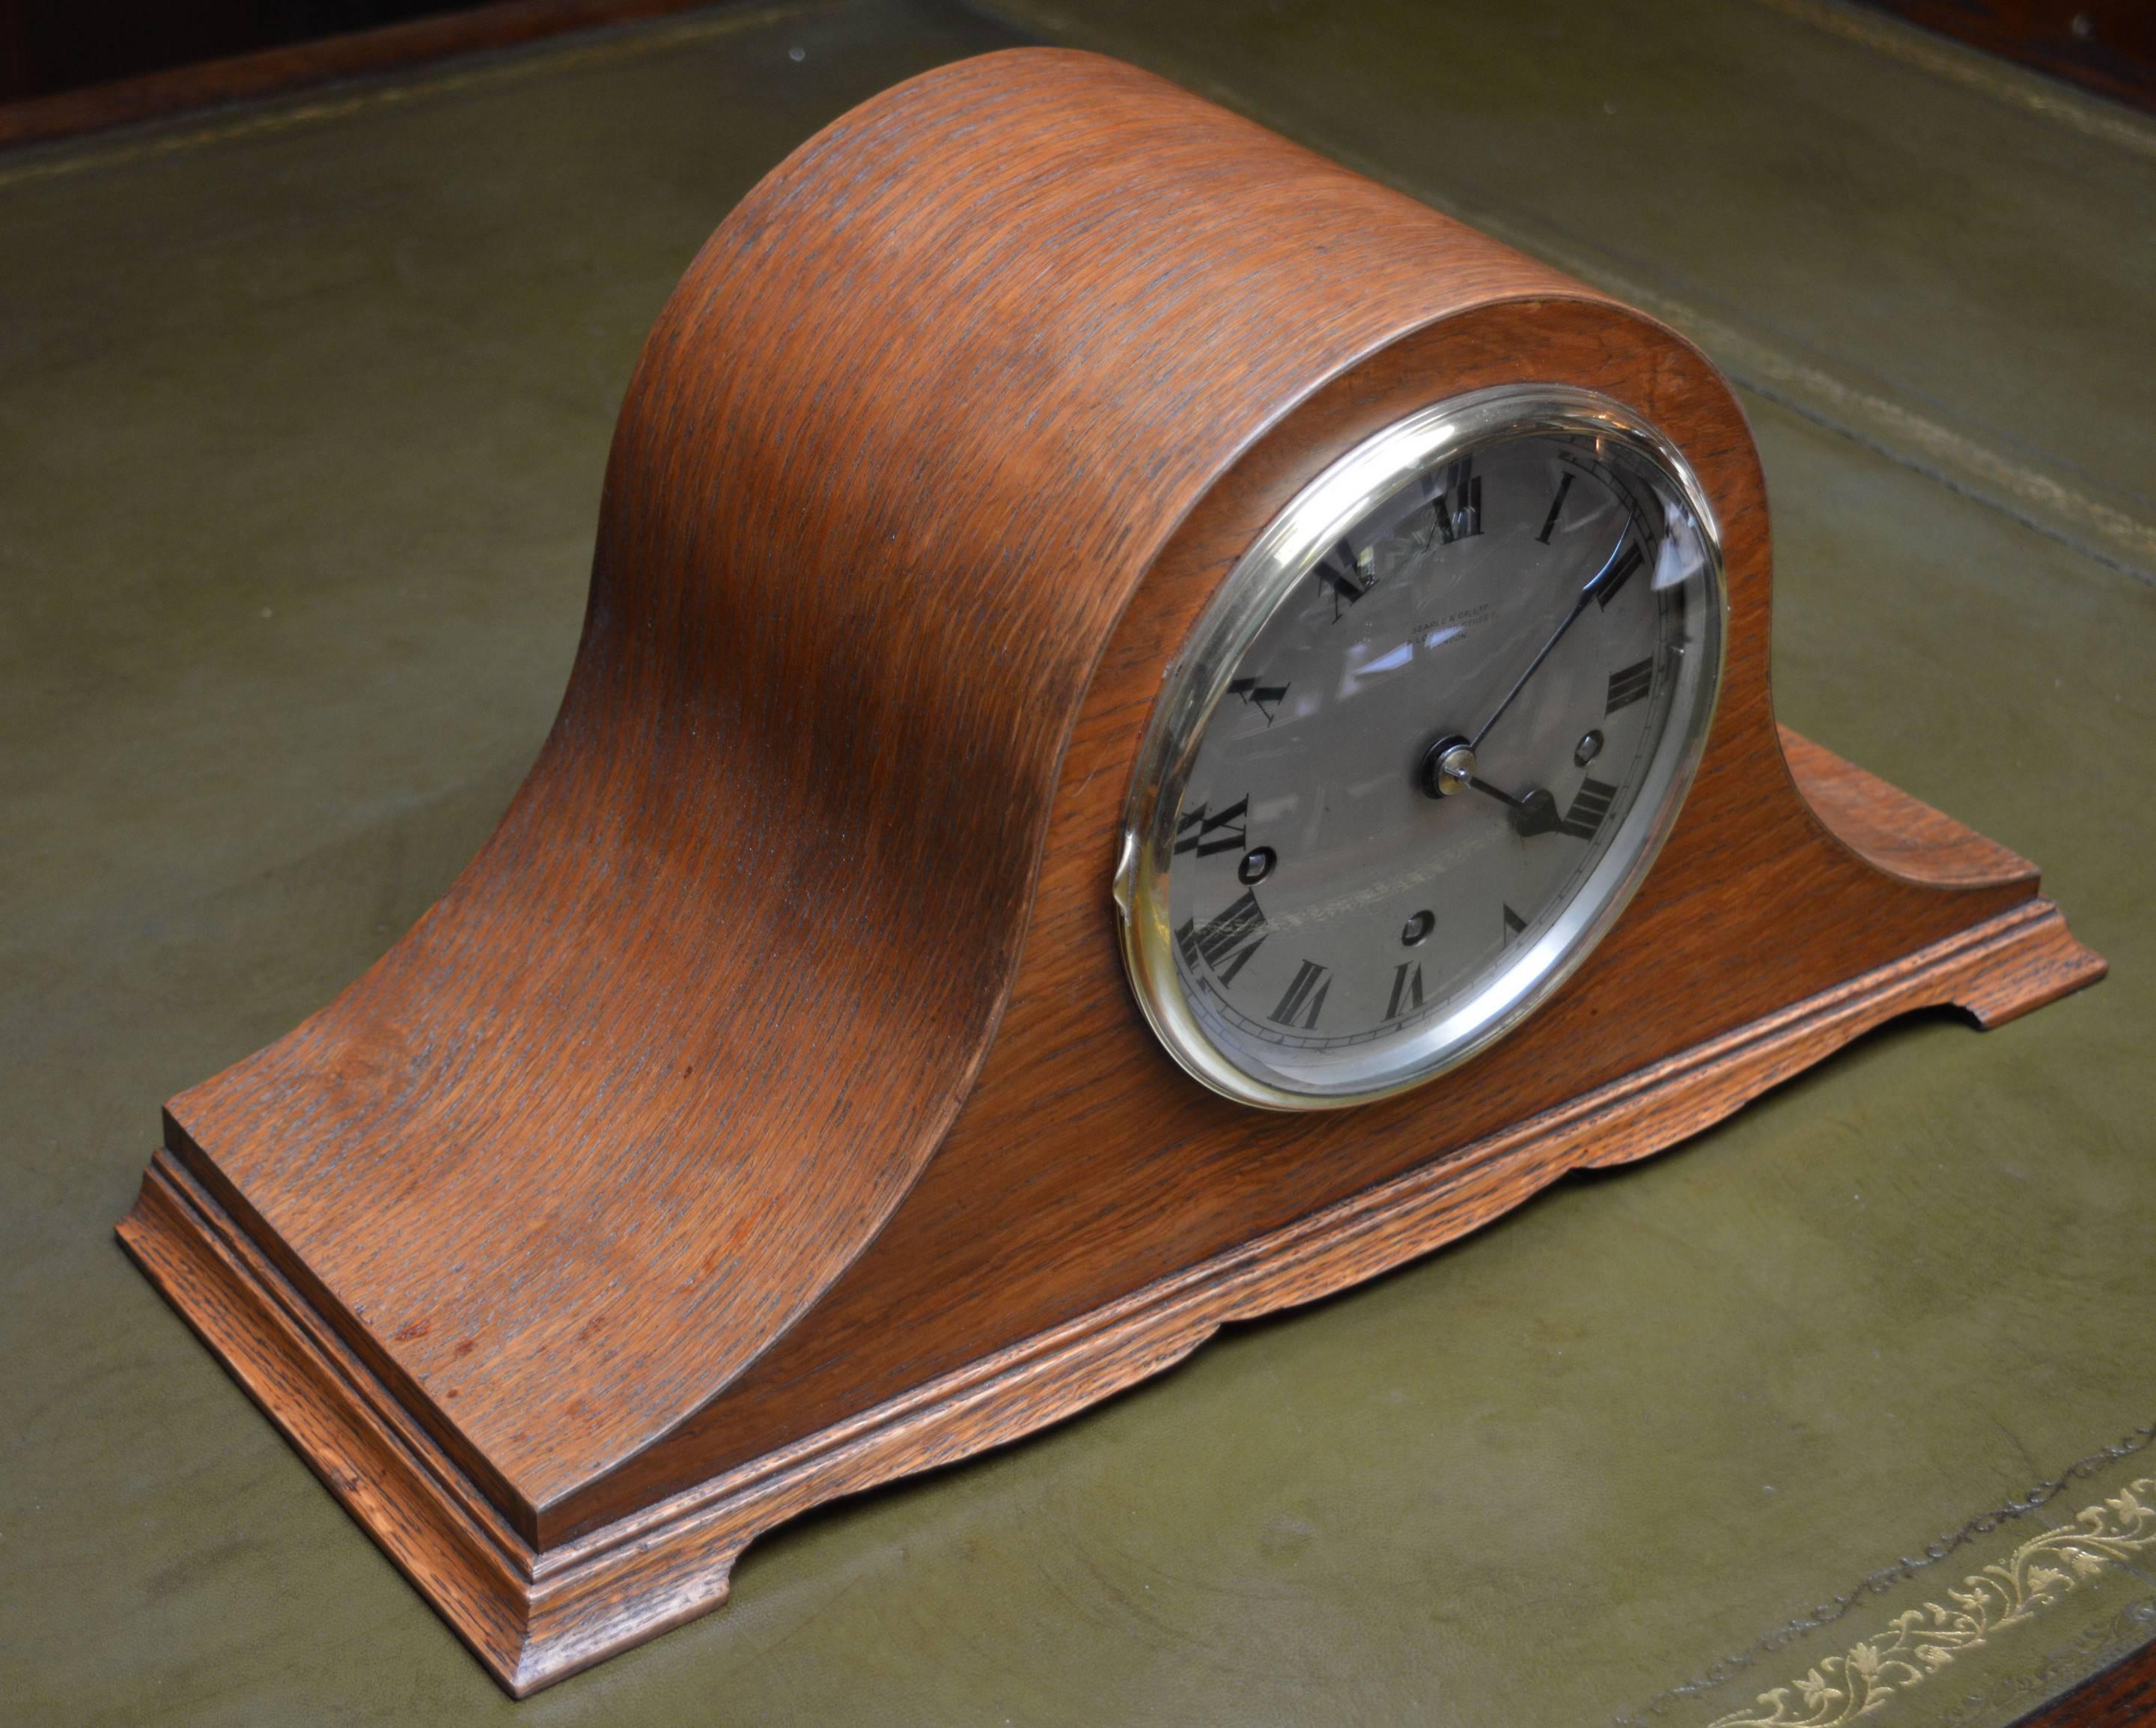 A good quality early 20th century mantel clock in the shape of a Napoleons hat. It has an oak case with a shaped plinth, a convex engraved and silvered dial signed by the original retailer Searle of London. It has a cast brass bezel with a convex